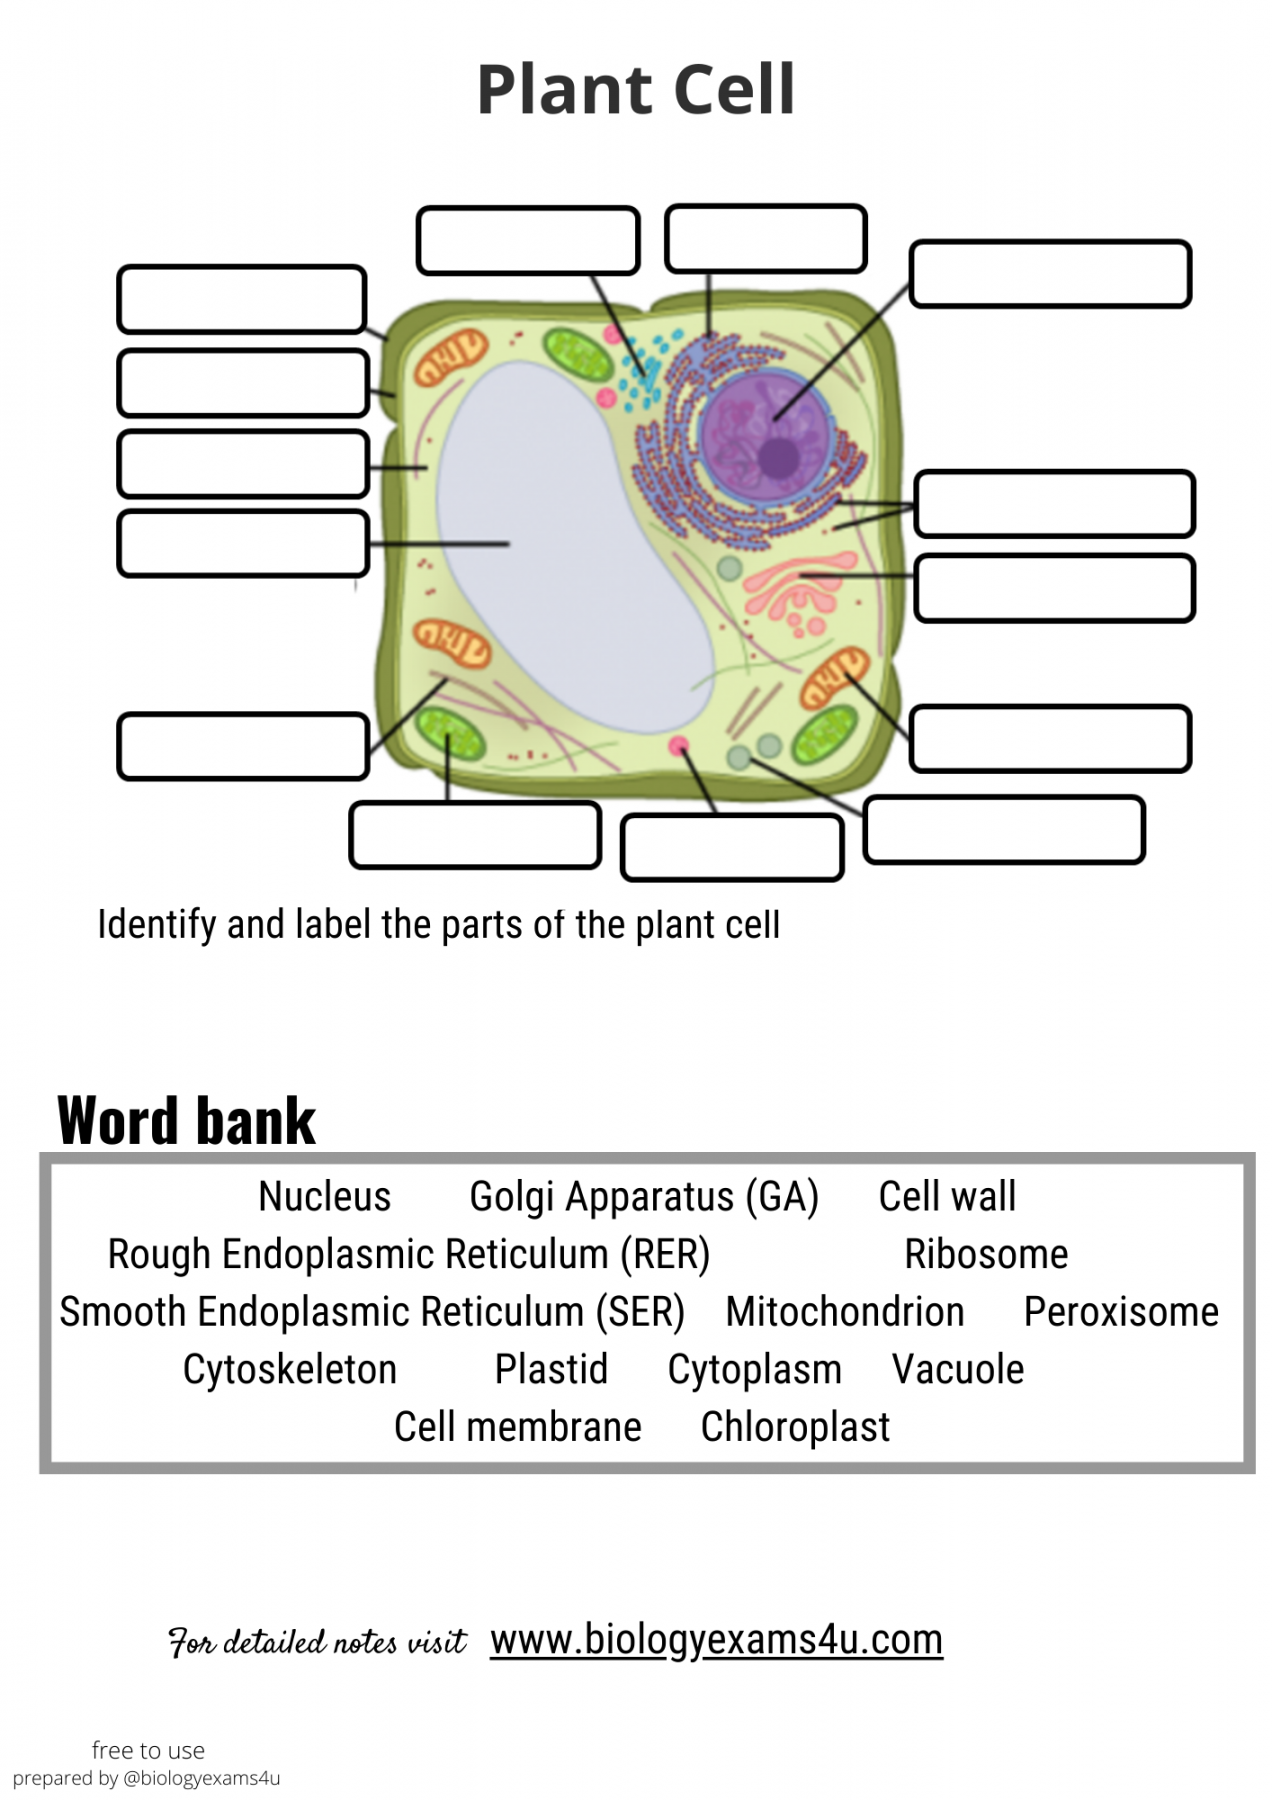 Worksheet and Quiz on Plant Cell Structure and Function